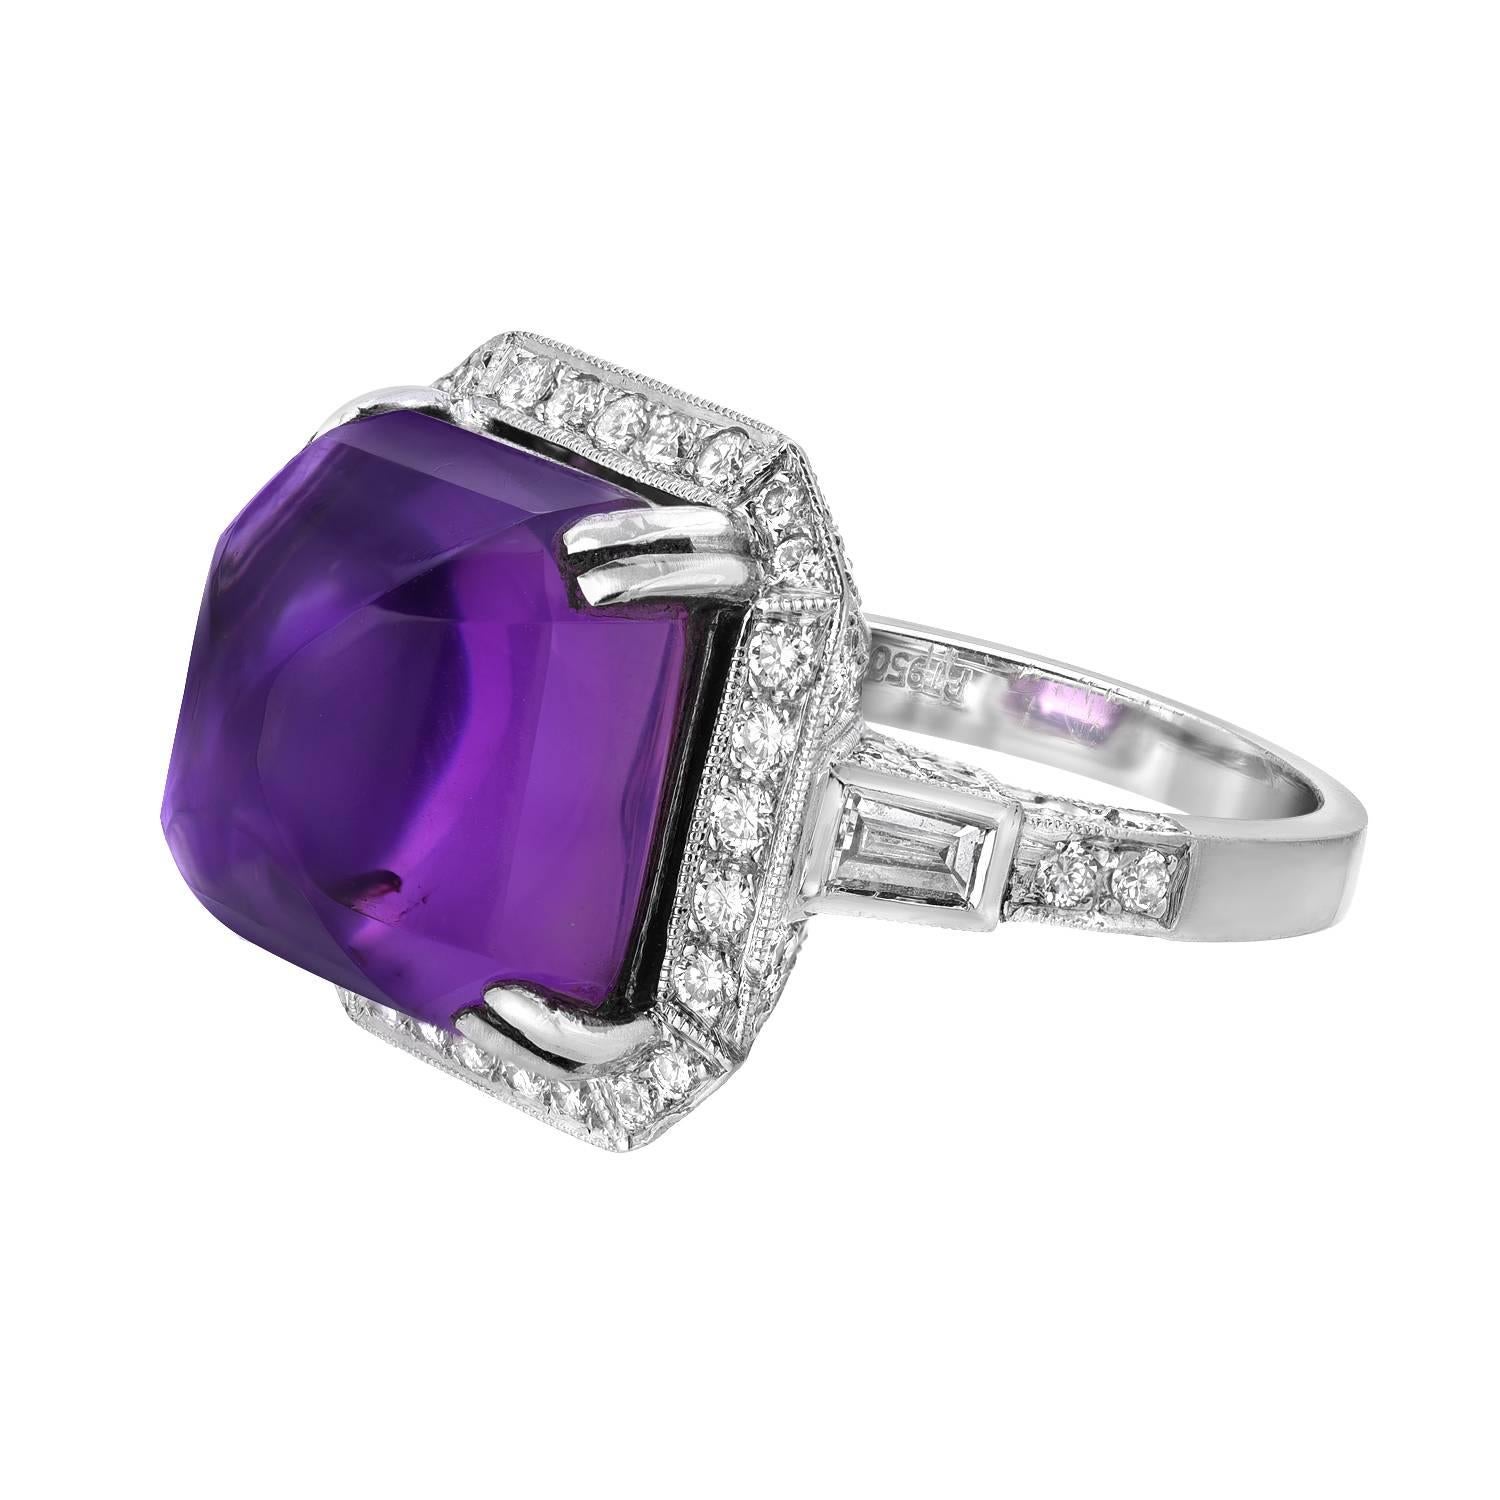 Set with a sugarloaf cabochon amethyst, in a round diamond frame, gallery, and half-hoop, mounted in platinum

Size 5 1/4

Approximate weight of the amethyst 8.00 carats
Approximate total weight of the diamonds 1.10 carats

